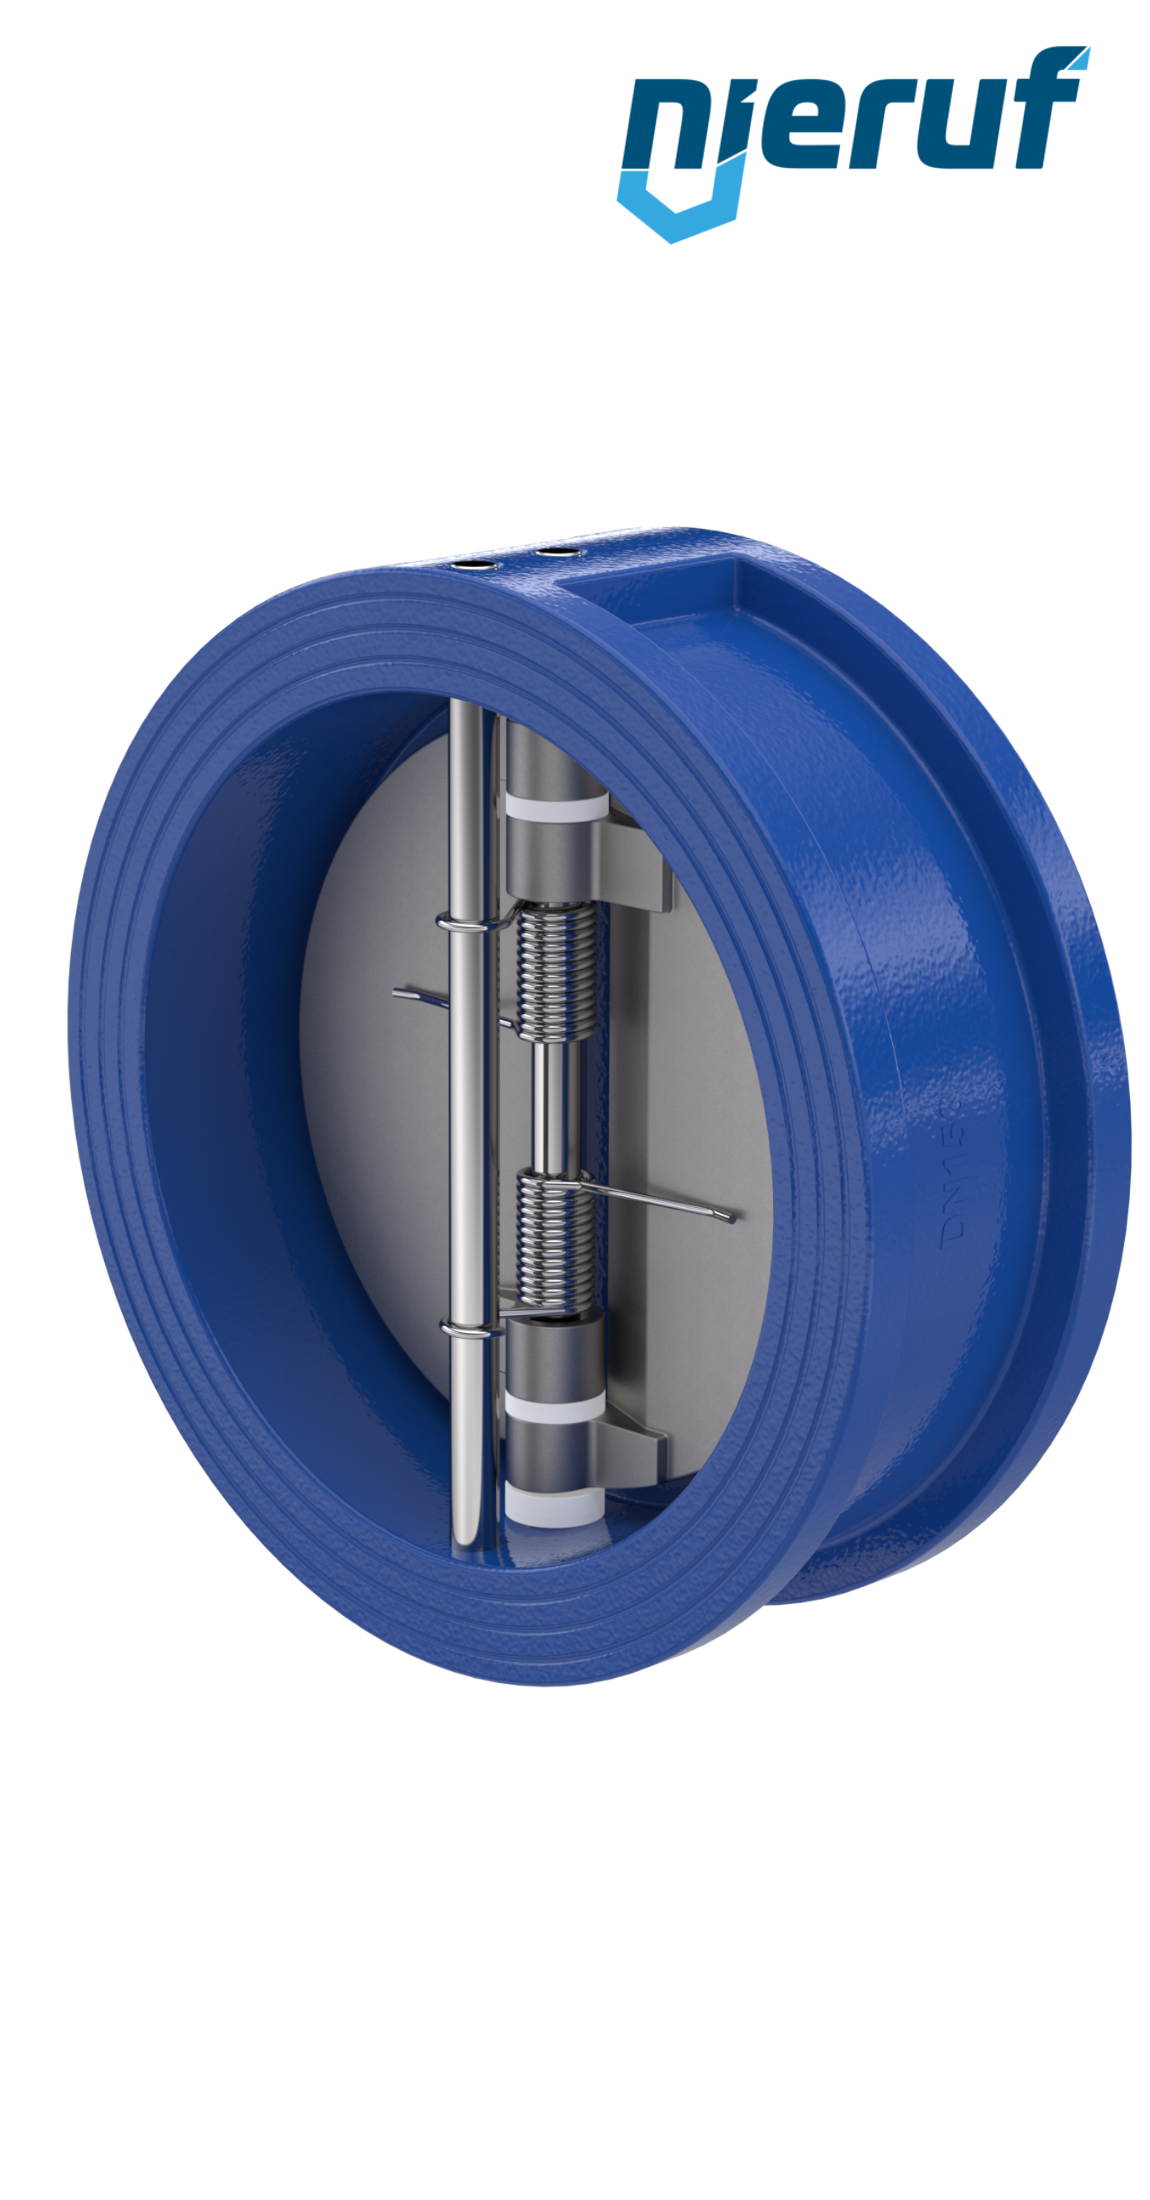 dual plate check valve DN150 DR02 GGG40 epoxyd plated blue 180µm EPDM